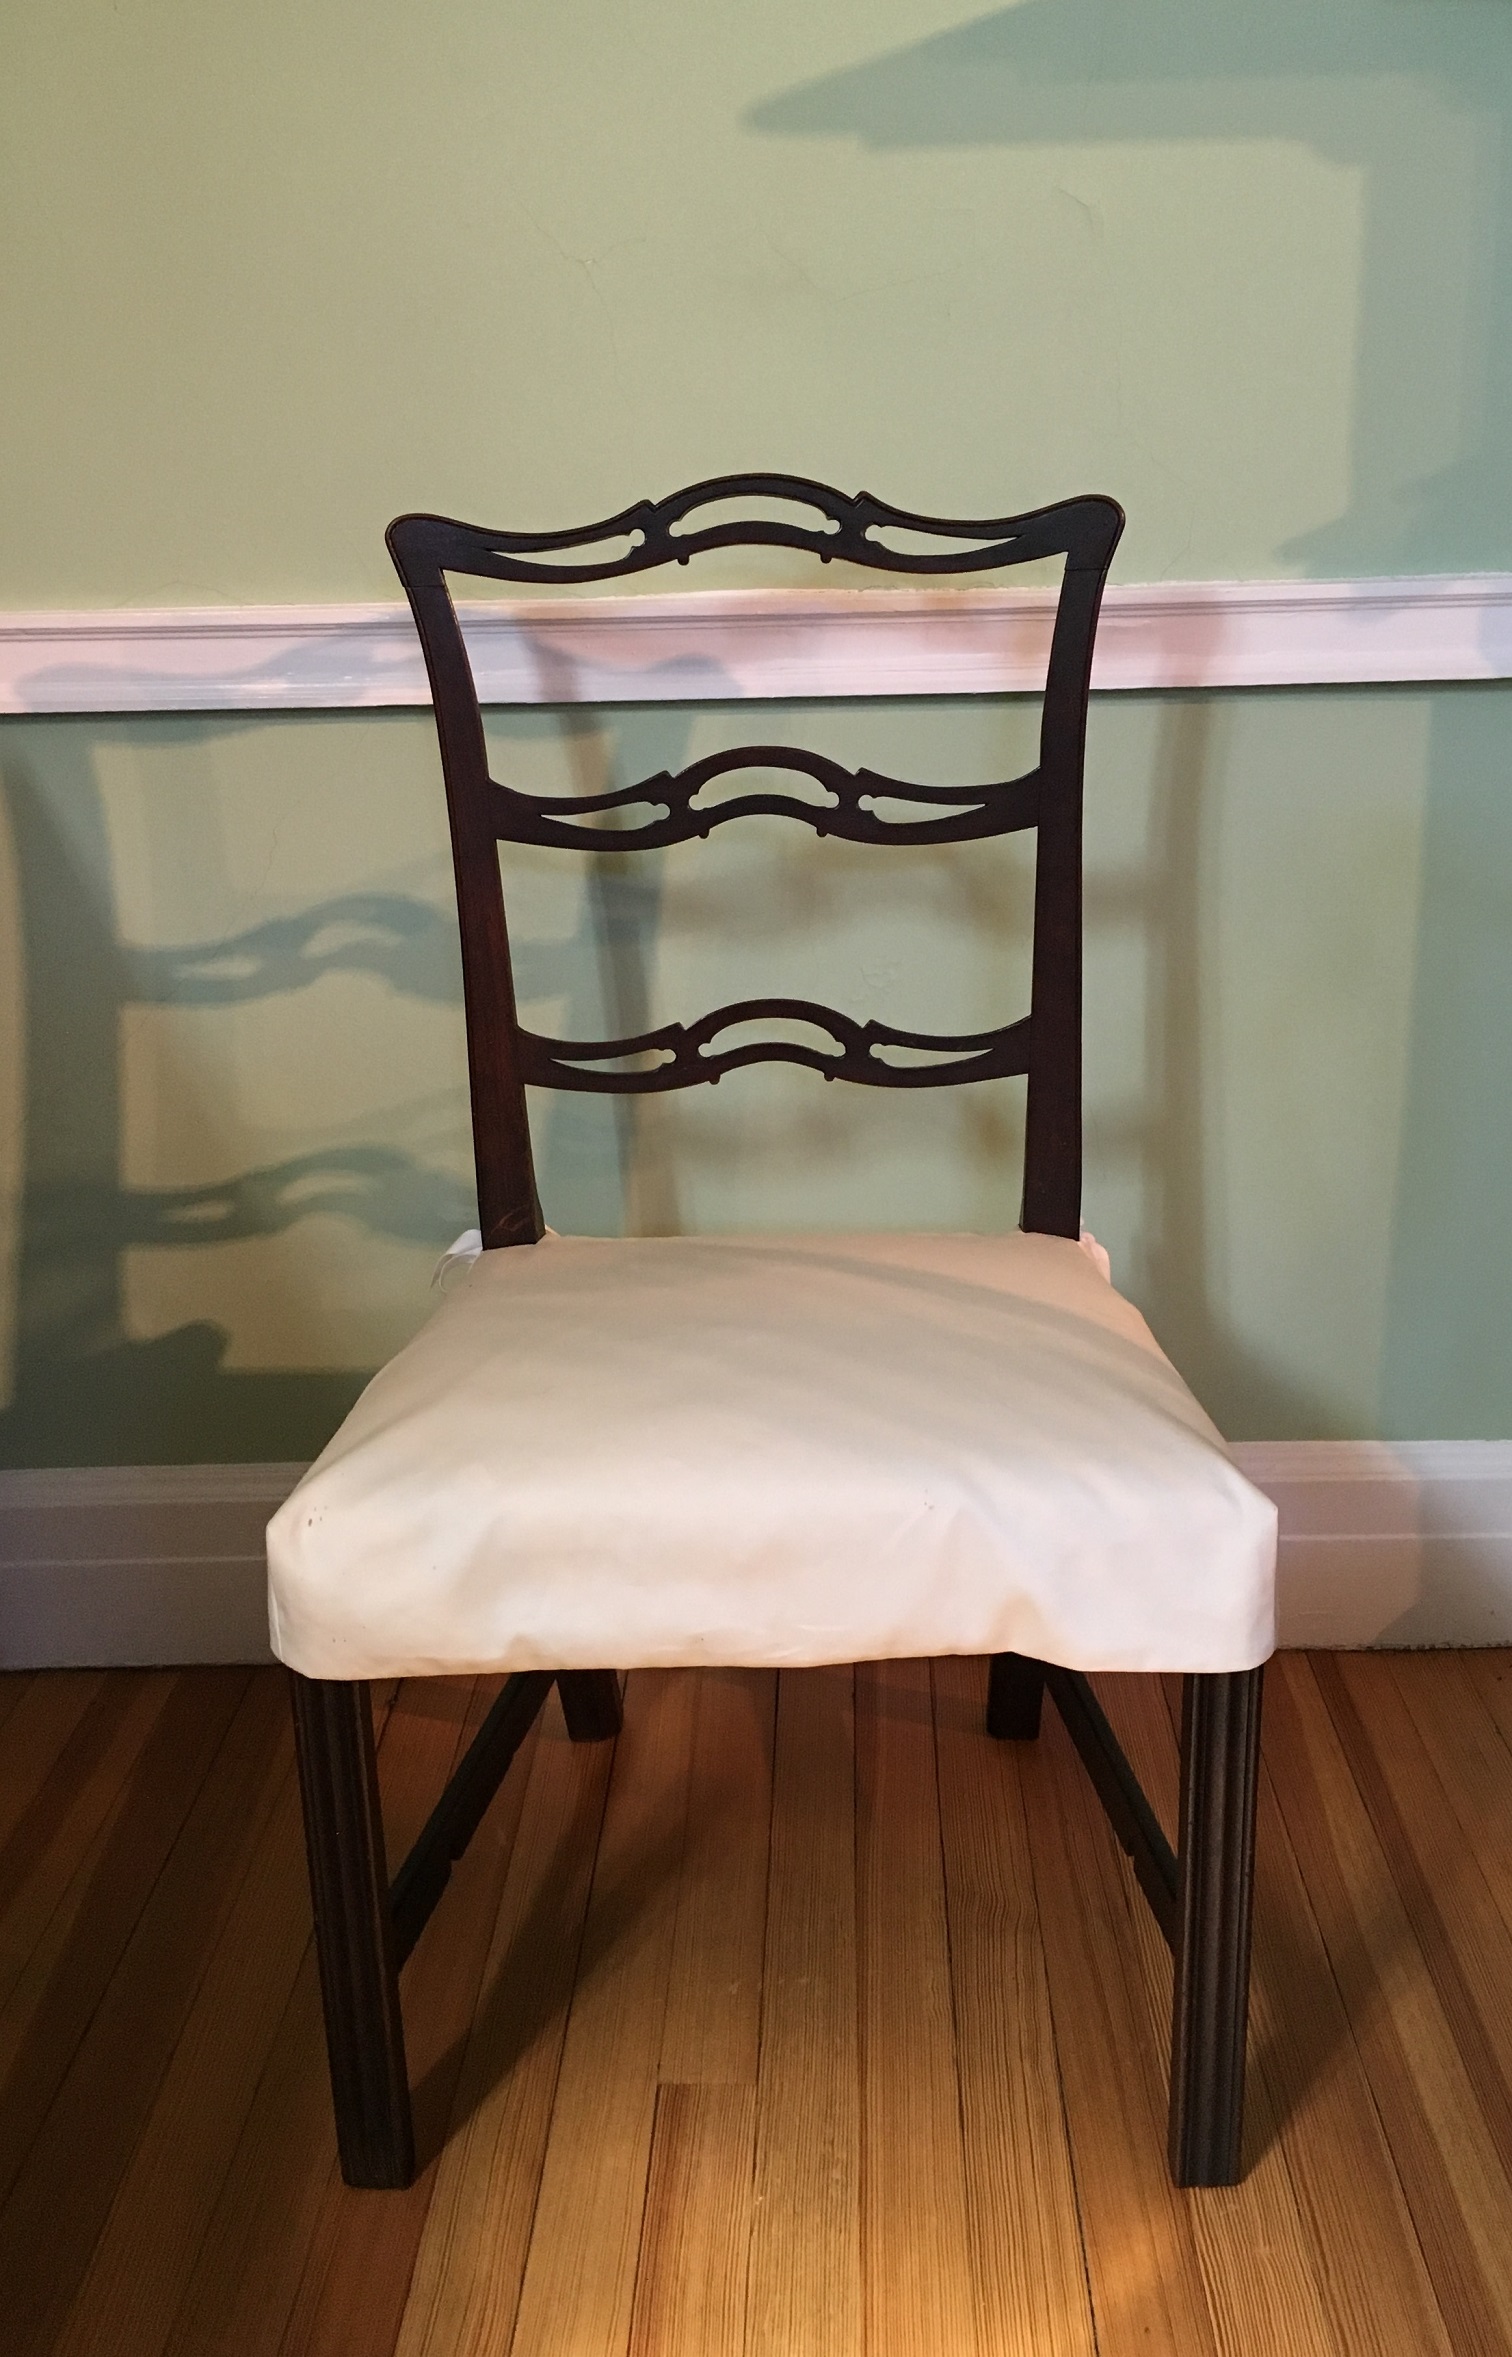 Reproduction of a chair owned by the Knoxes in their Maine home.